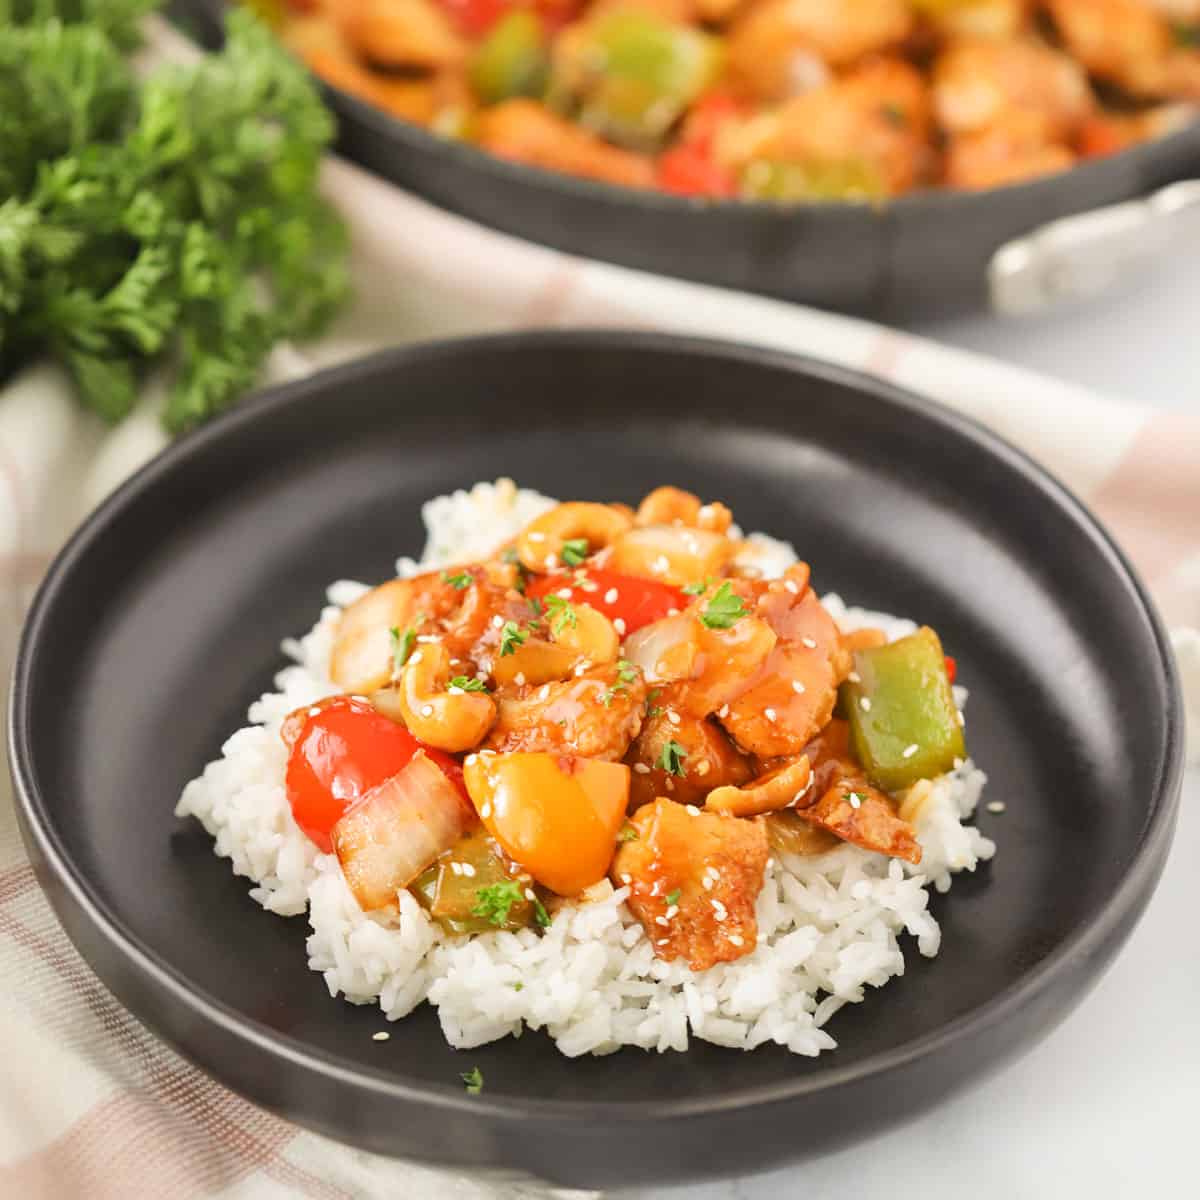 Easy Recipe for Cashew Chicken - The Carefree Kitchen